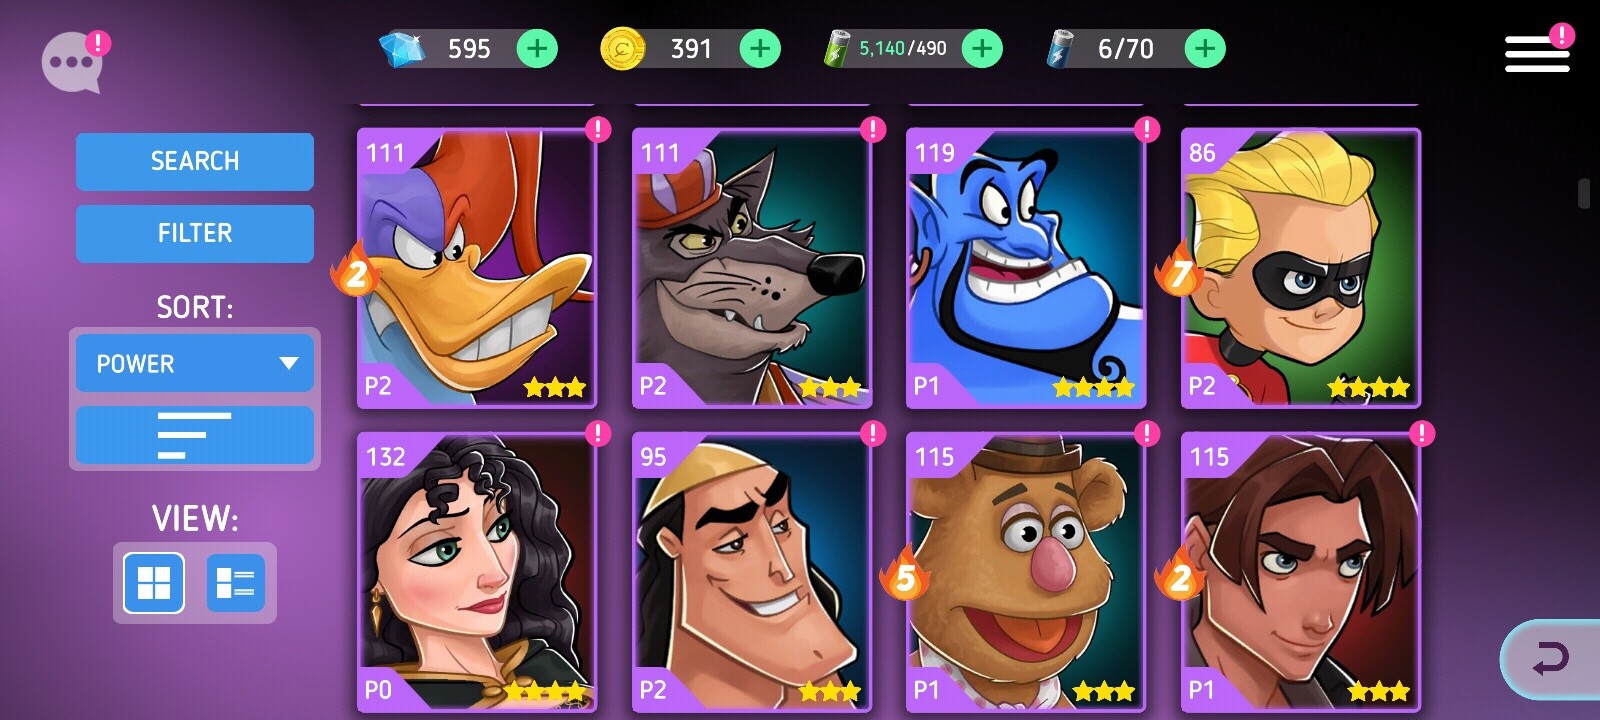 Roles for my characters - Hero Concepts - Disney Heroes: Battle Mode